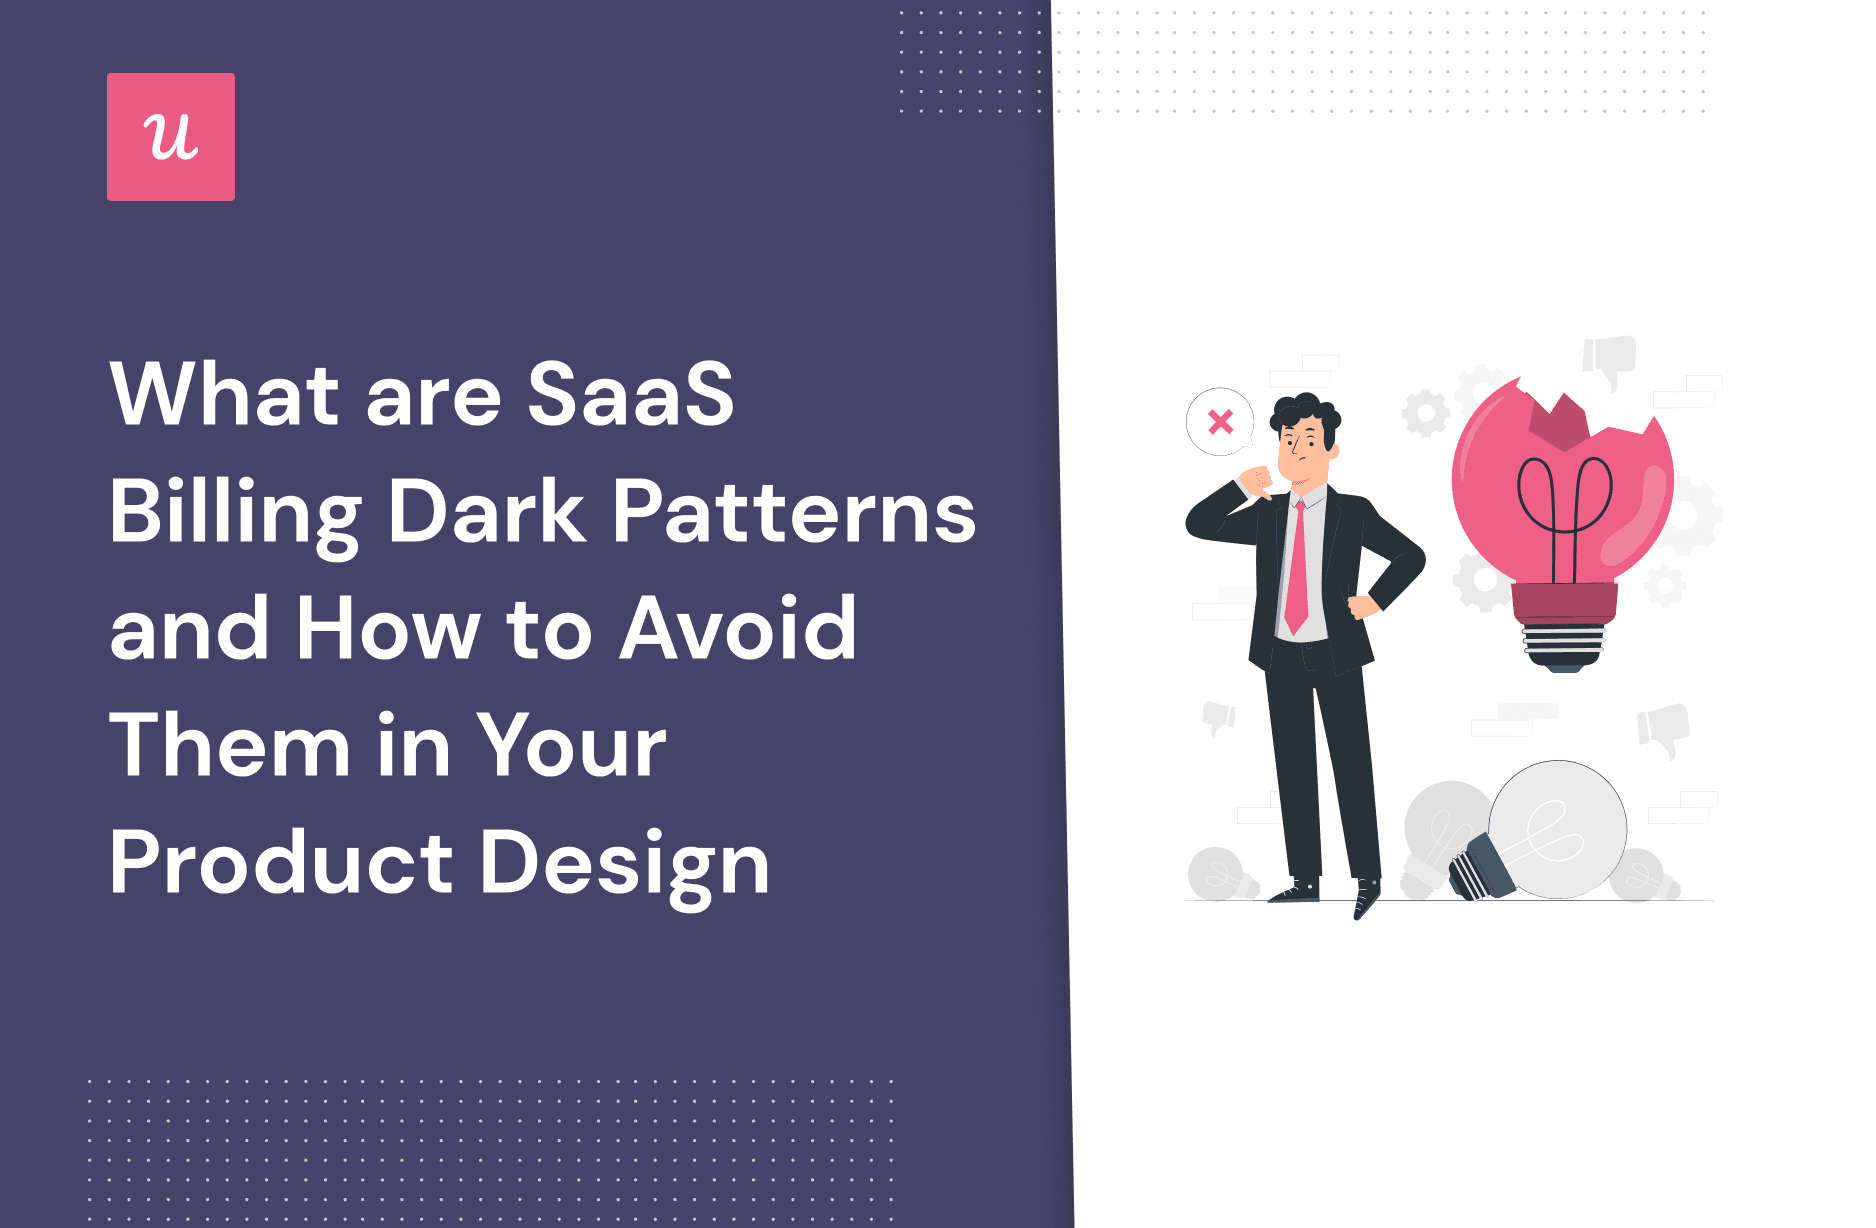 What Are SaaS Billing Dark Patterns and How to Avoid Them in Your Product Design cover